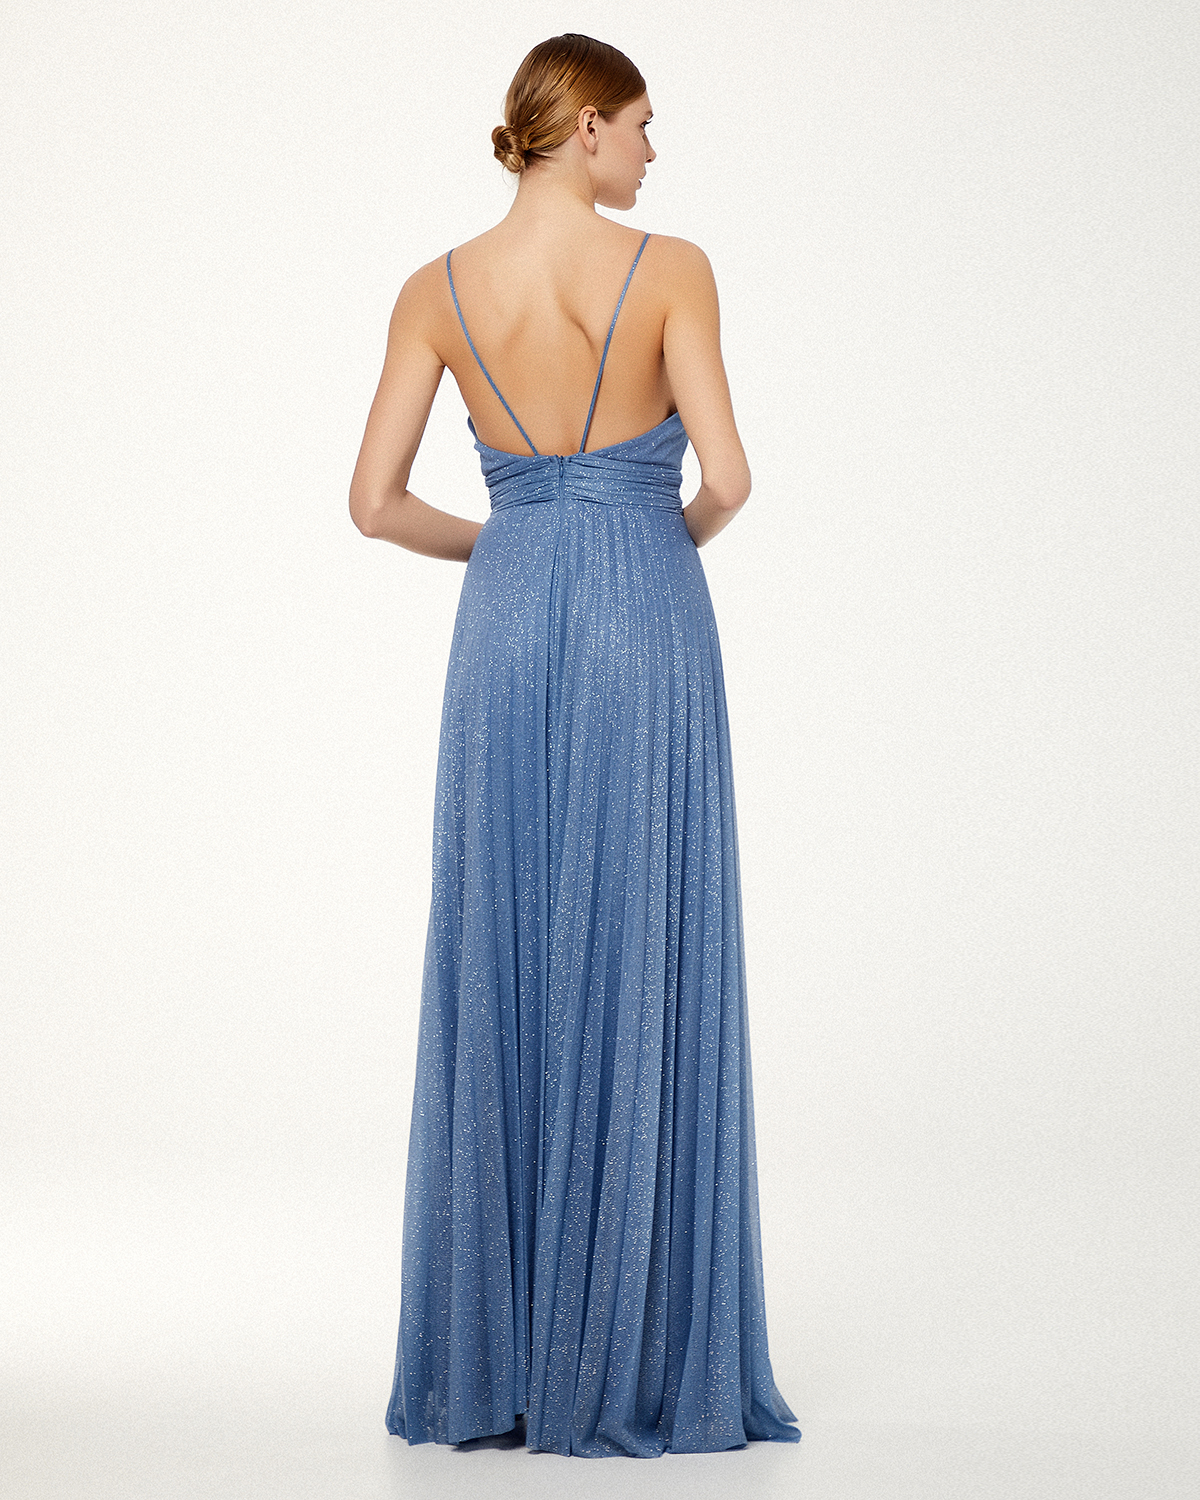 Long cocktail pleated dress with shining fabric and straps